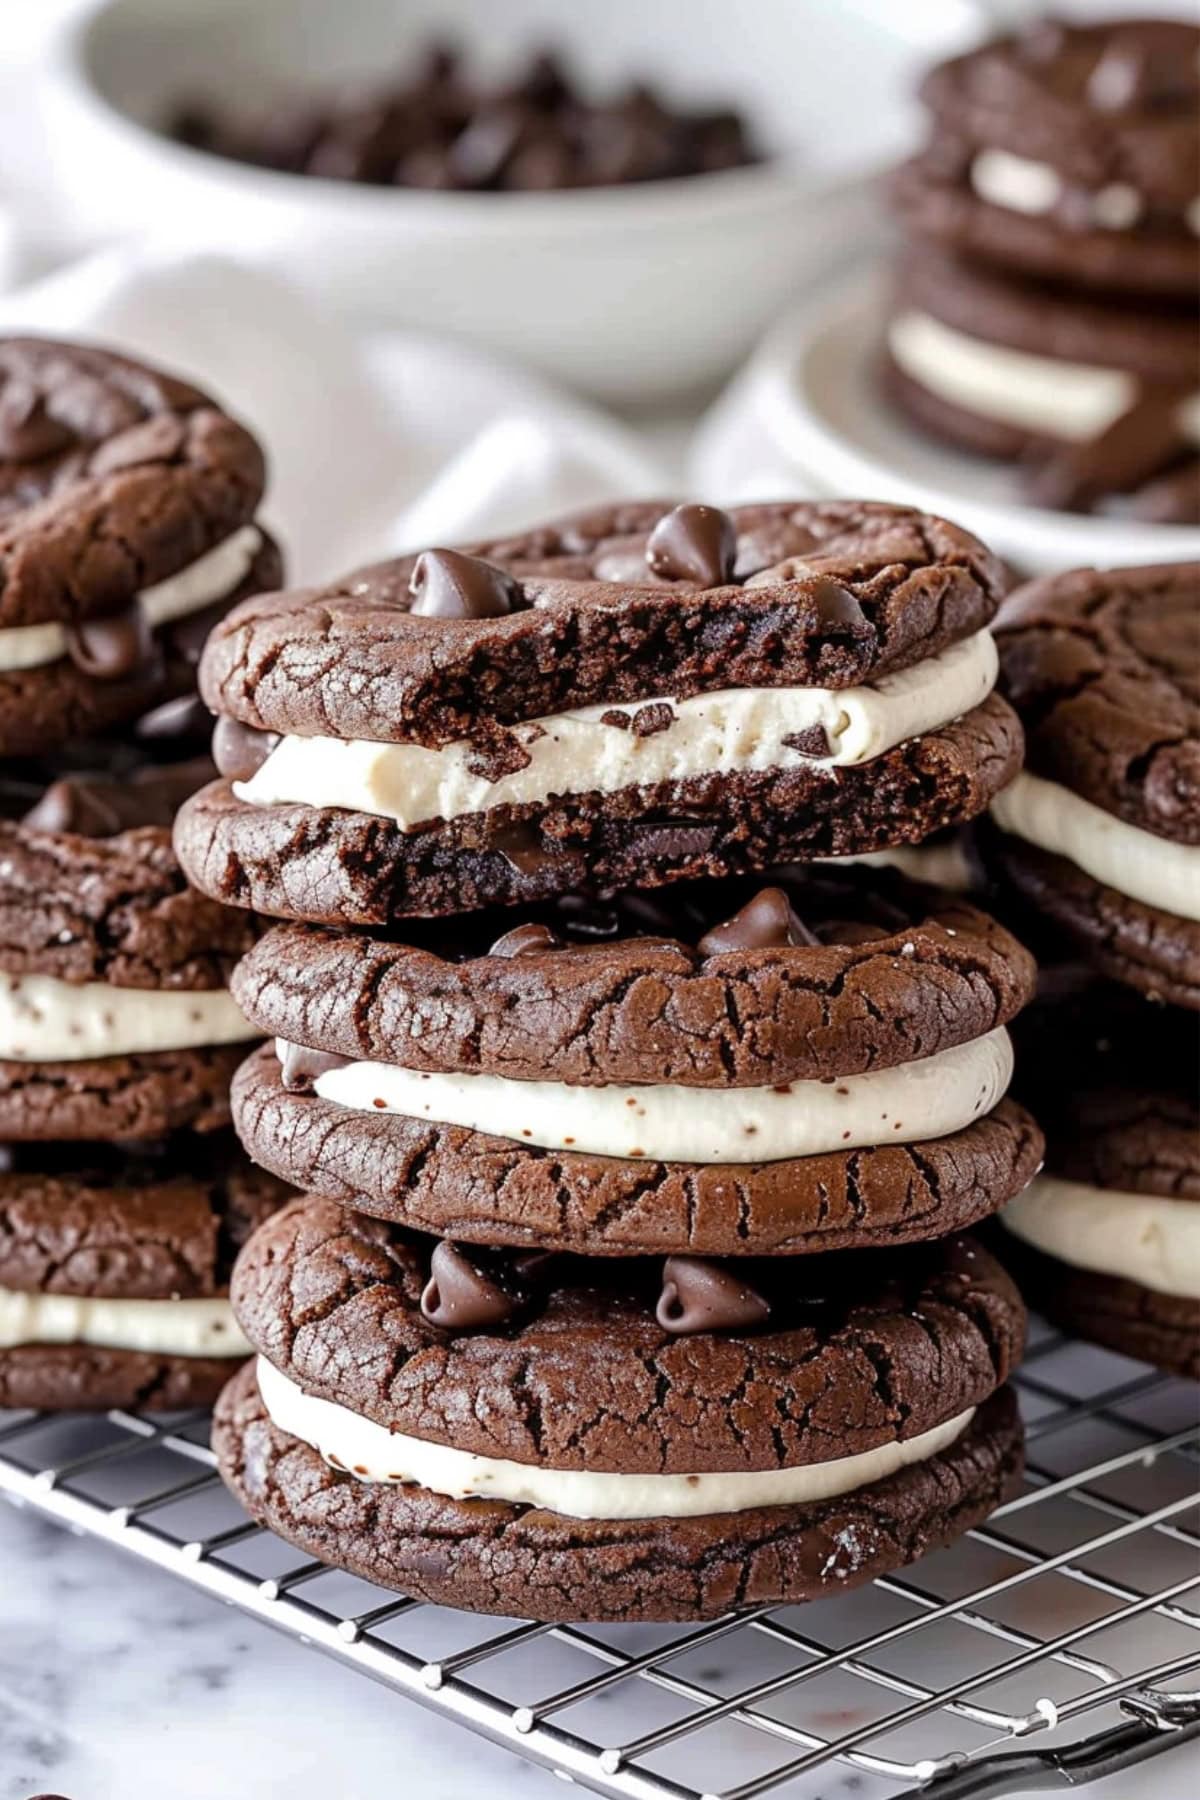 Soft and chewy chocolate sandwich cookies with mini chocolate chips and vanilla filling.